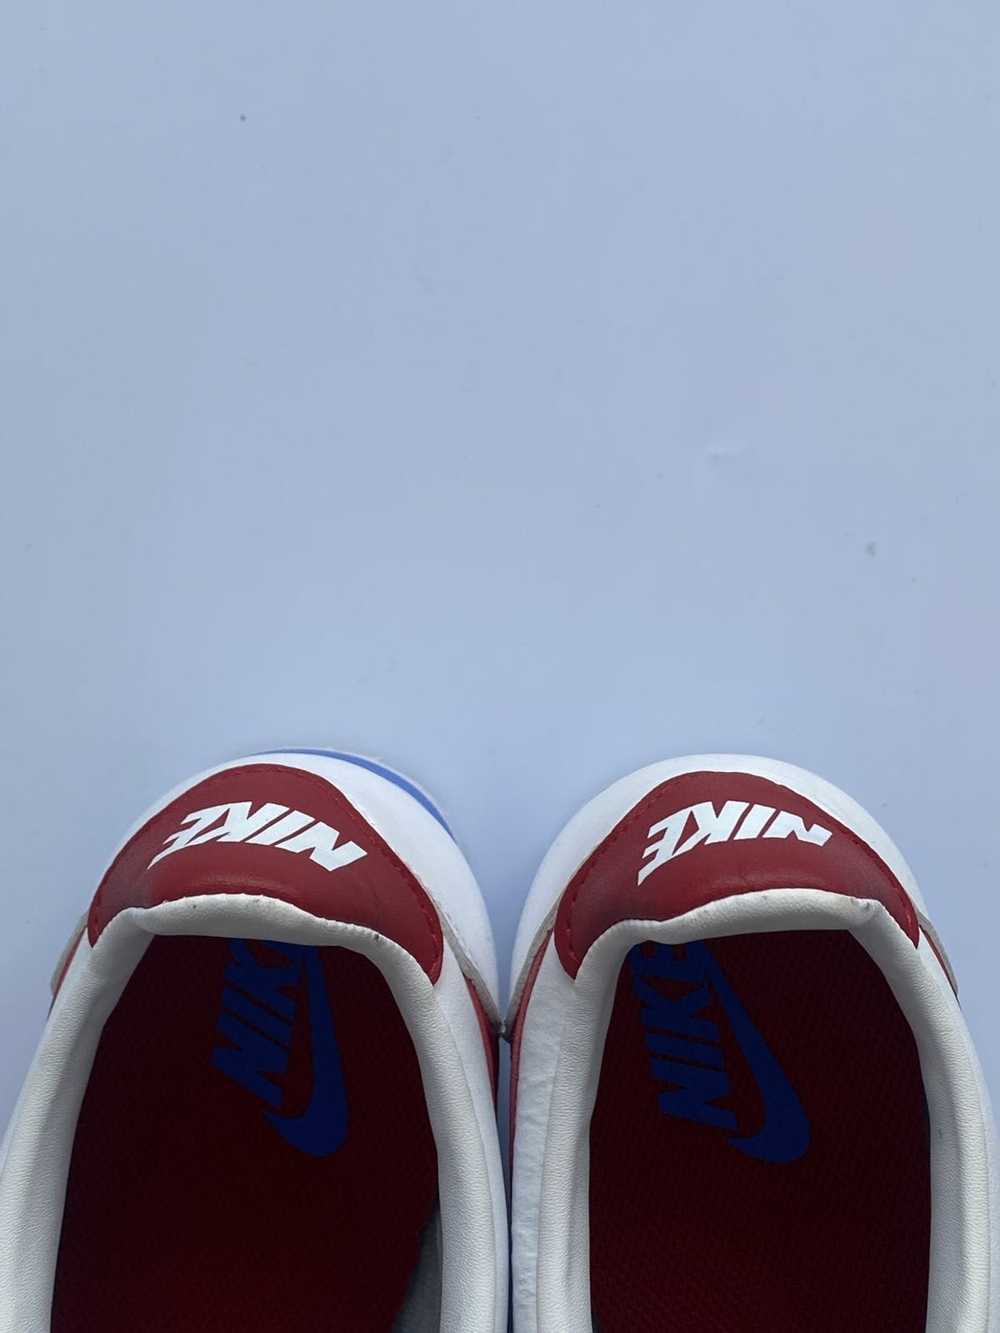 Nike Nike Cortez “Forrest Gump” sneakers - image 6